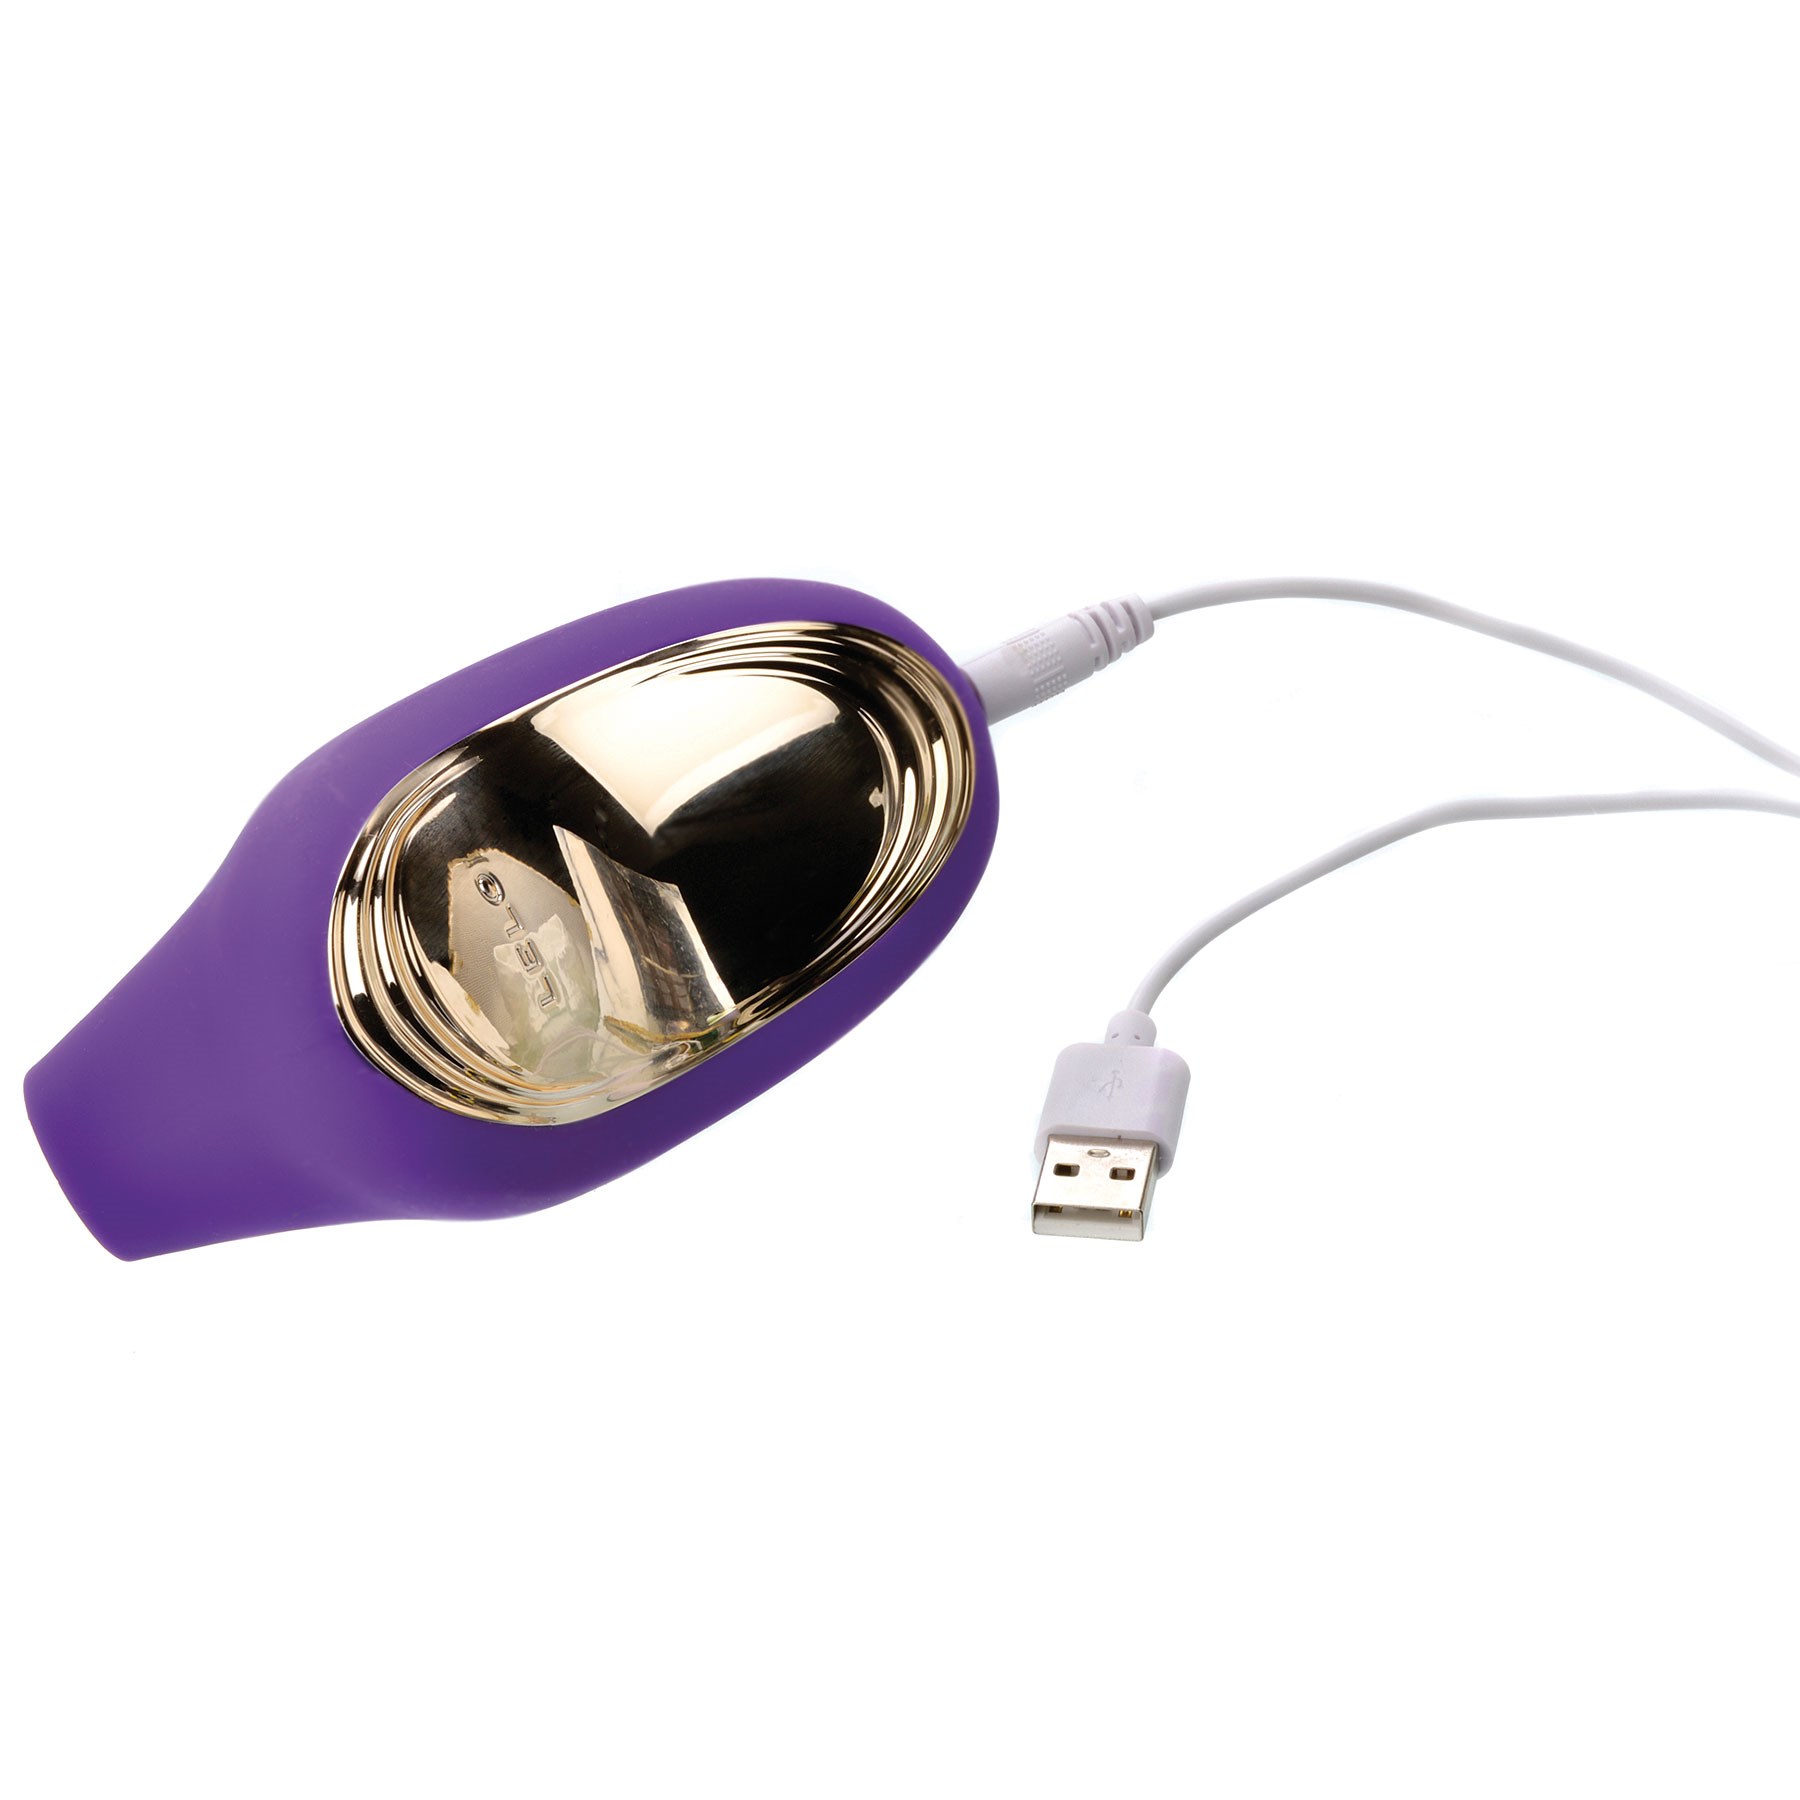 Sona 2 Cruise Sonic Clitoral Massager with charger